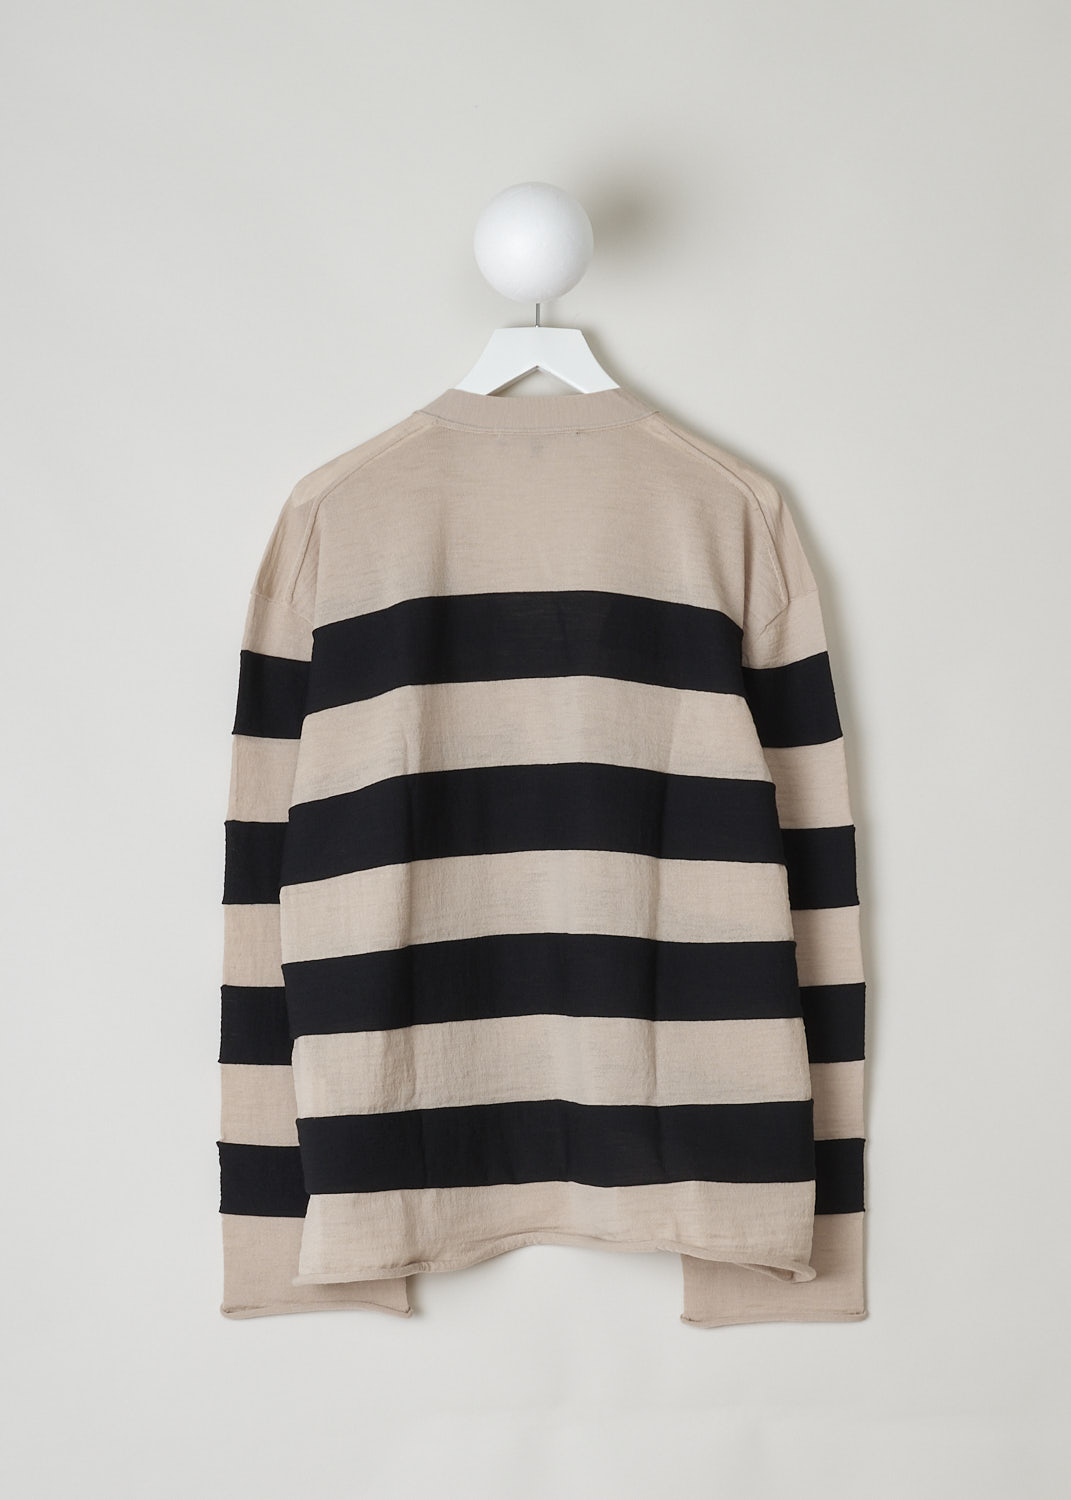 SOFIE D’HOORE, BEIGE AND BLACK STRIPED CARDIGAN, MANIA_YFIMBI_SAAND_BLACK, Beige, Black, Back, This beige and black striped wool cardigan has a V-neckline and a front button closure. The cuffs and hemline have a rolled hemline. The cardigan has a wider silhouette. 
